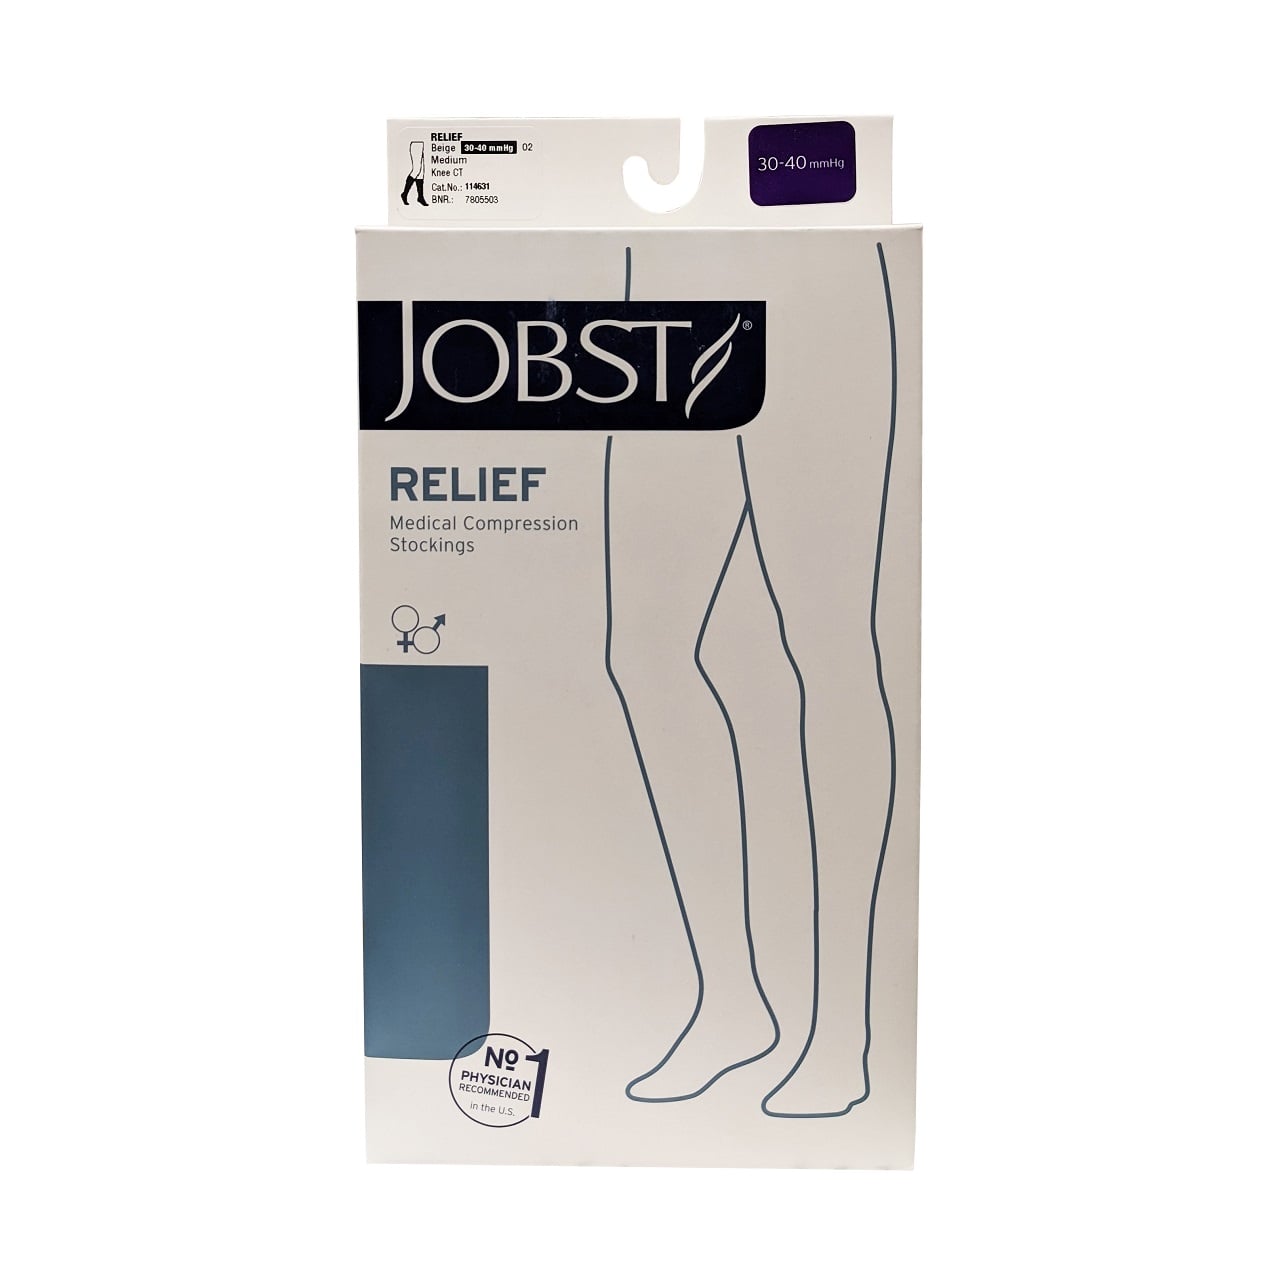 Product label for Jobst Relief Compression Stockings 30-40 mmHg - Knee High / Closed Toe / Beige (Medium)